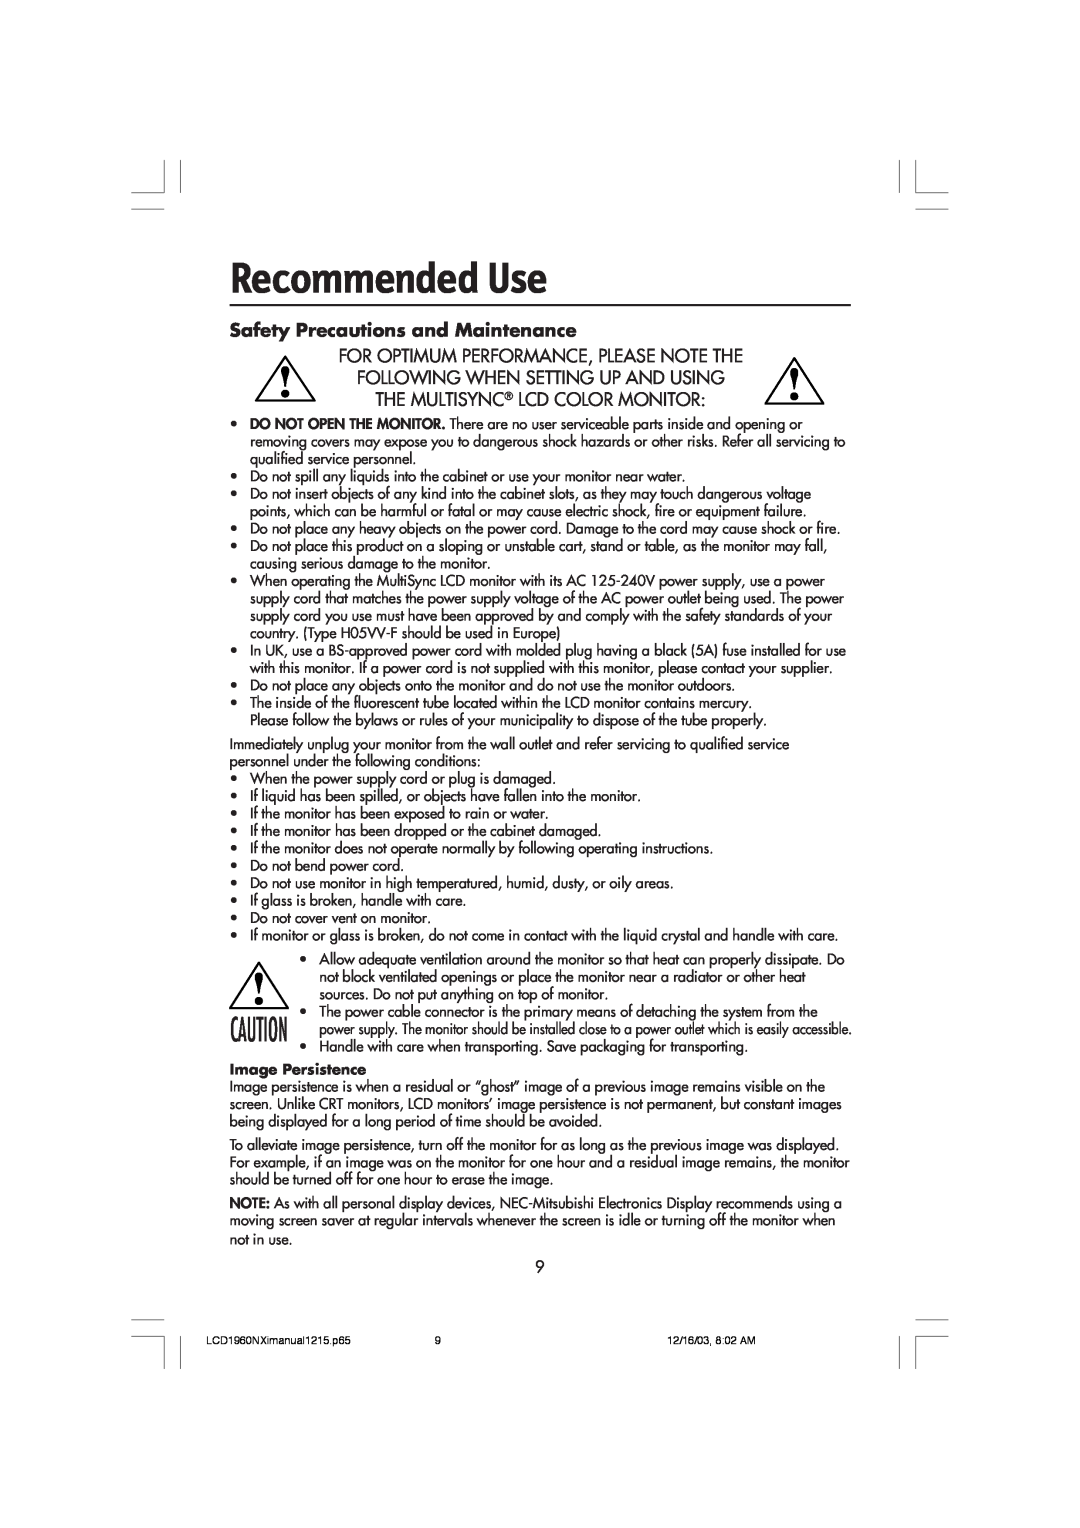 NEC LCD1960NXI manual Recommended Use, Safety Precautions and Maintenance, For Optimum Performance, Please Note The 